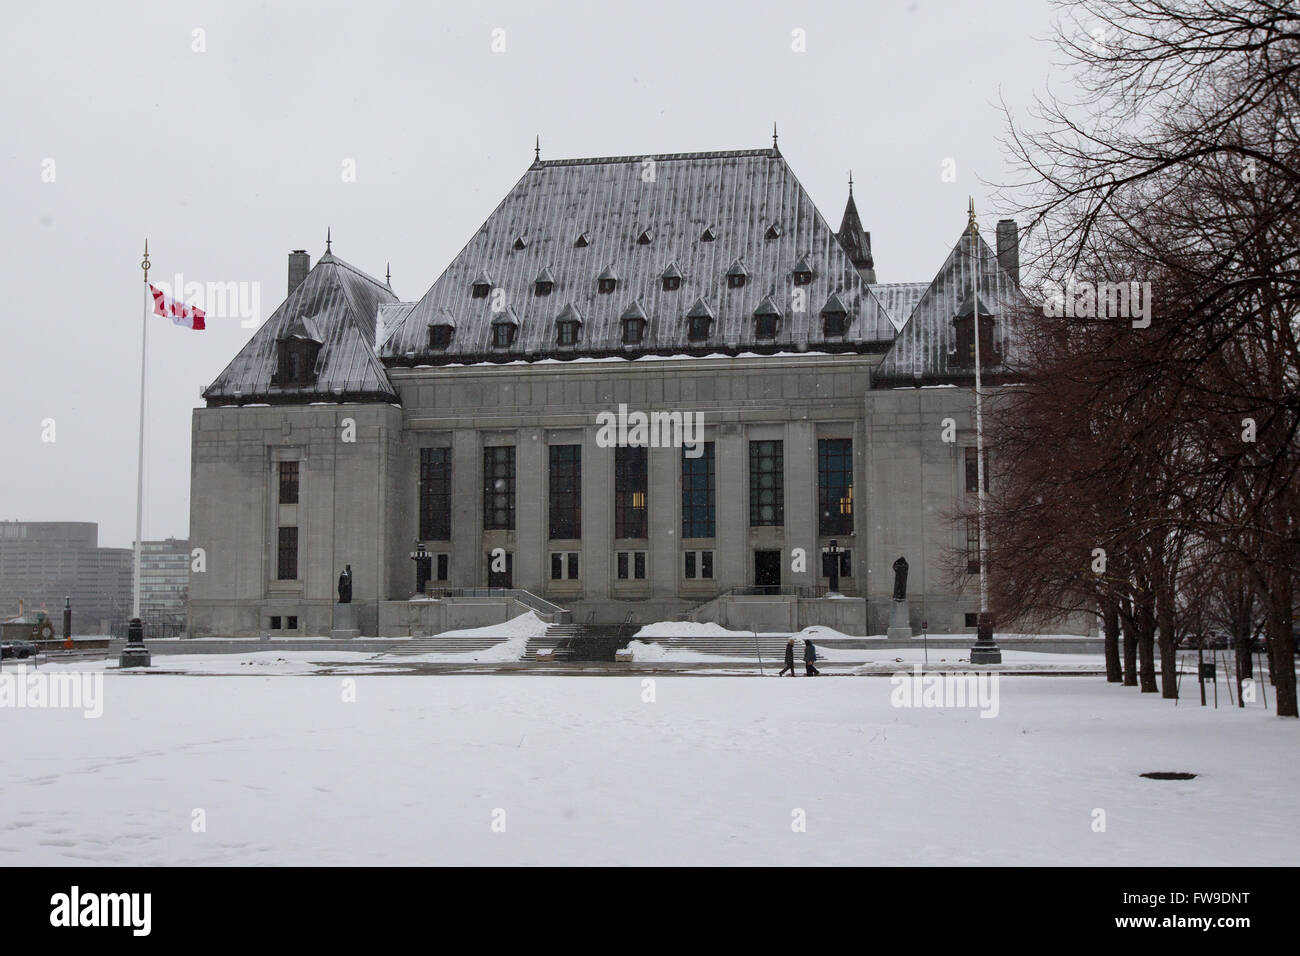 Supreme Court Of Canada In Ottawa Ont On Thursday Jan 28 2016